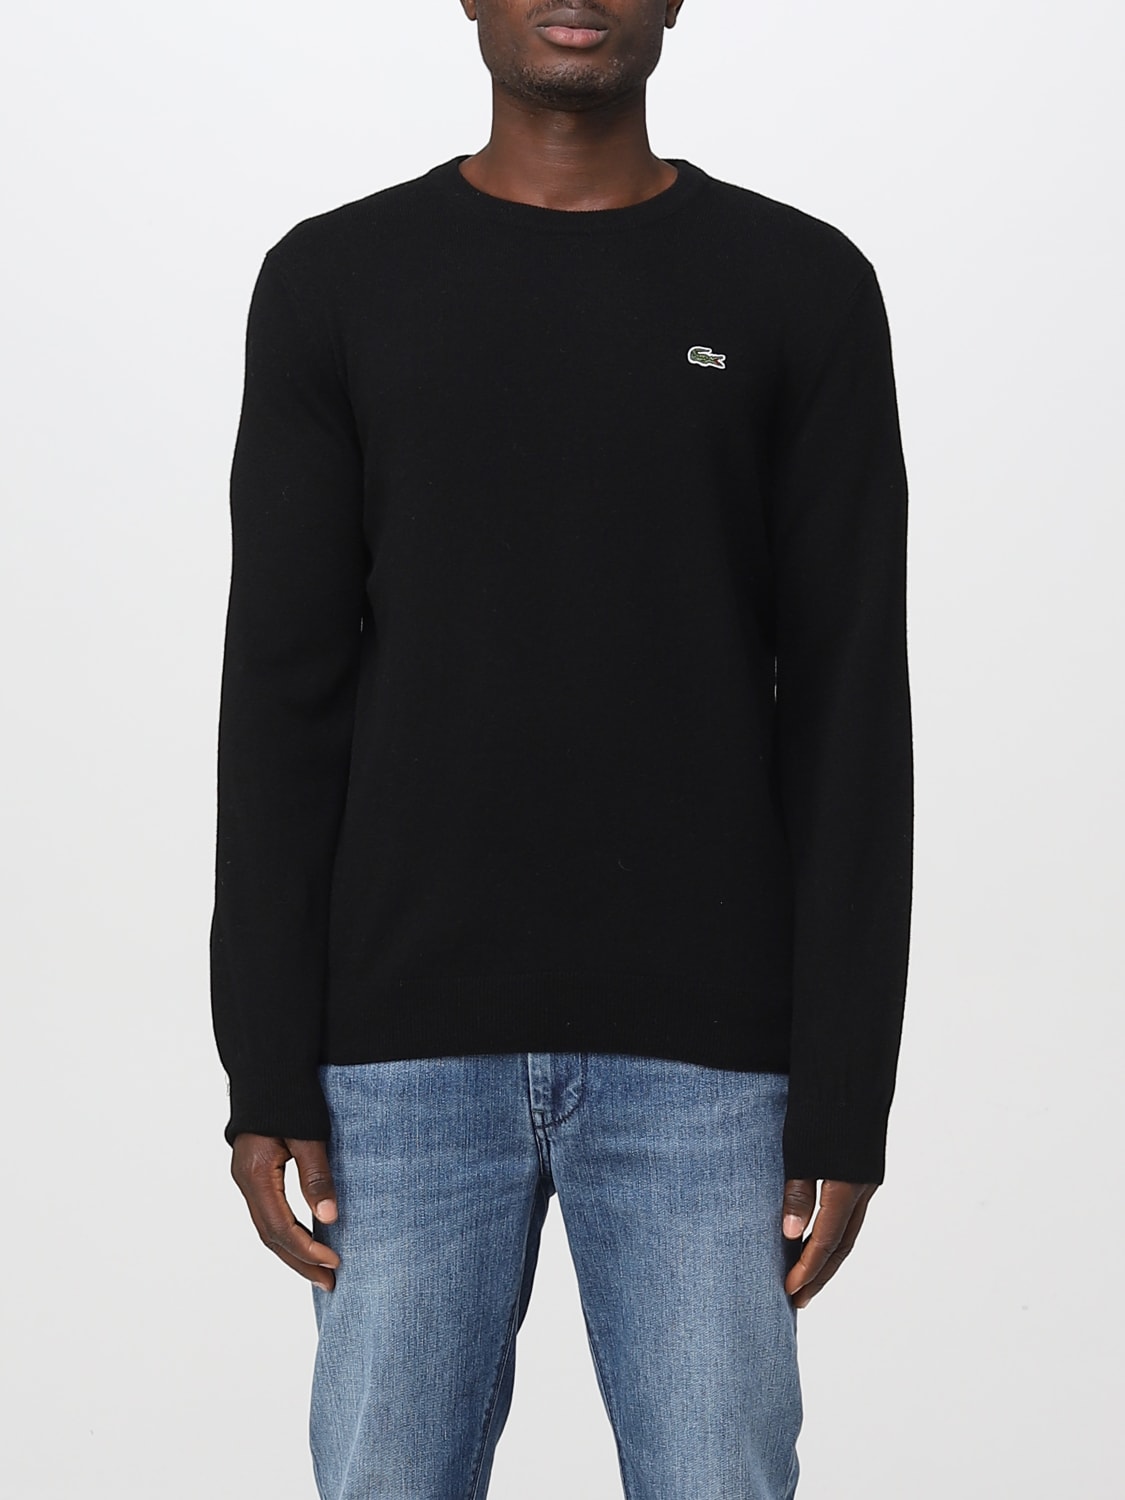 Lacoste Outlet: sweater for man - Black | Lacoste sweater AH3449 online ...